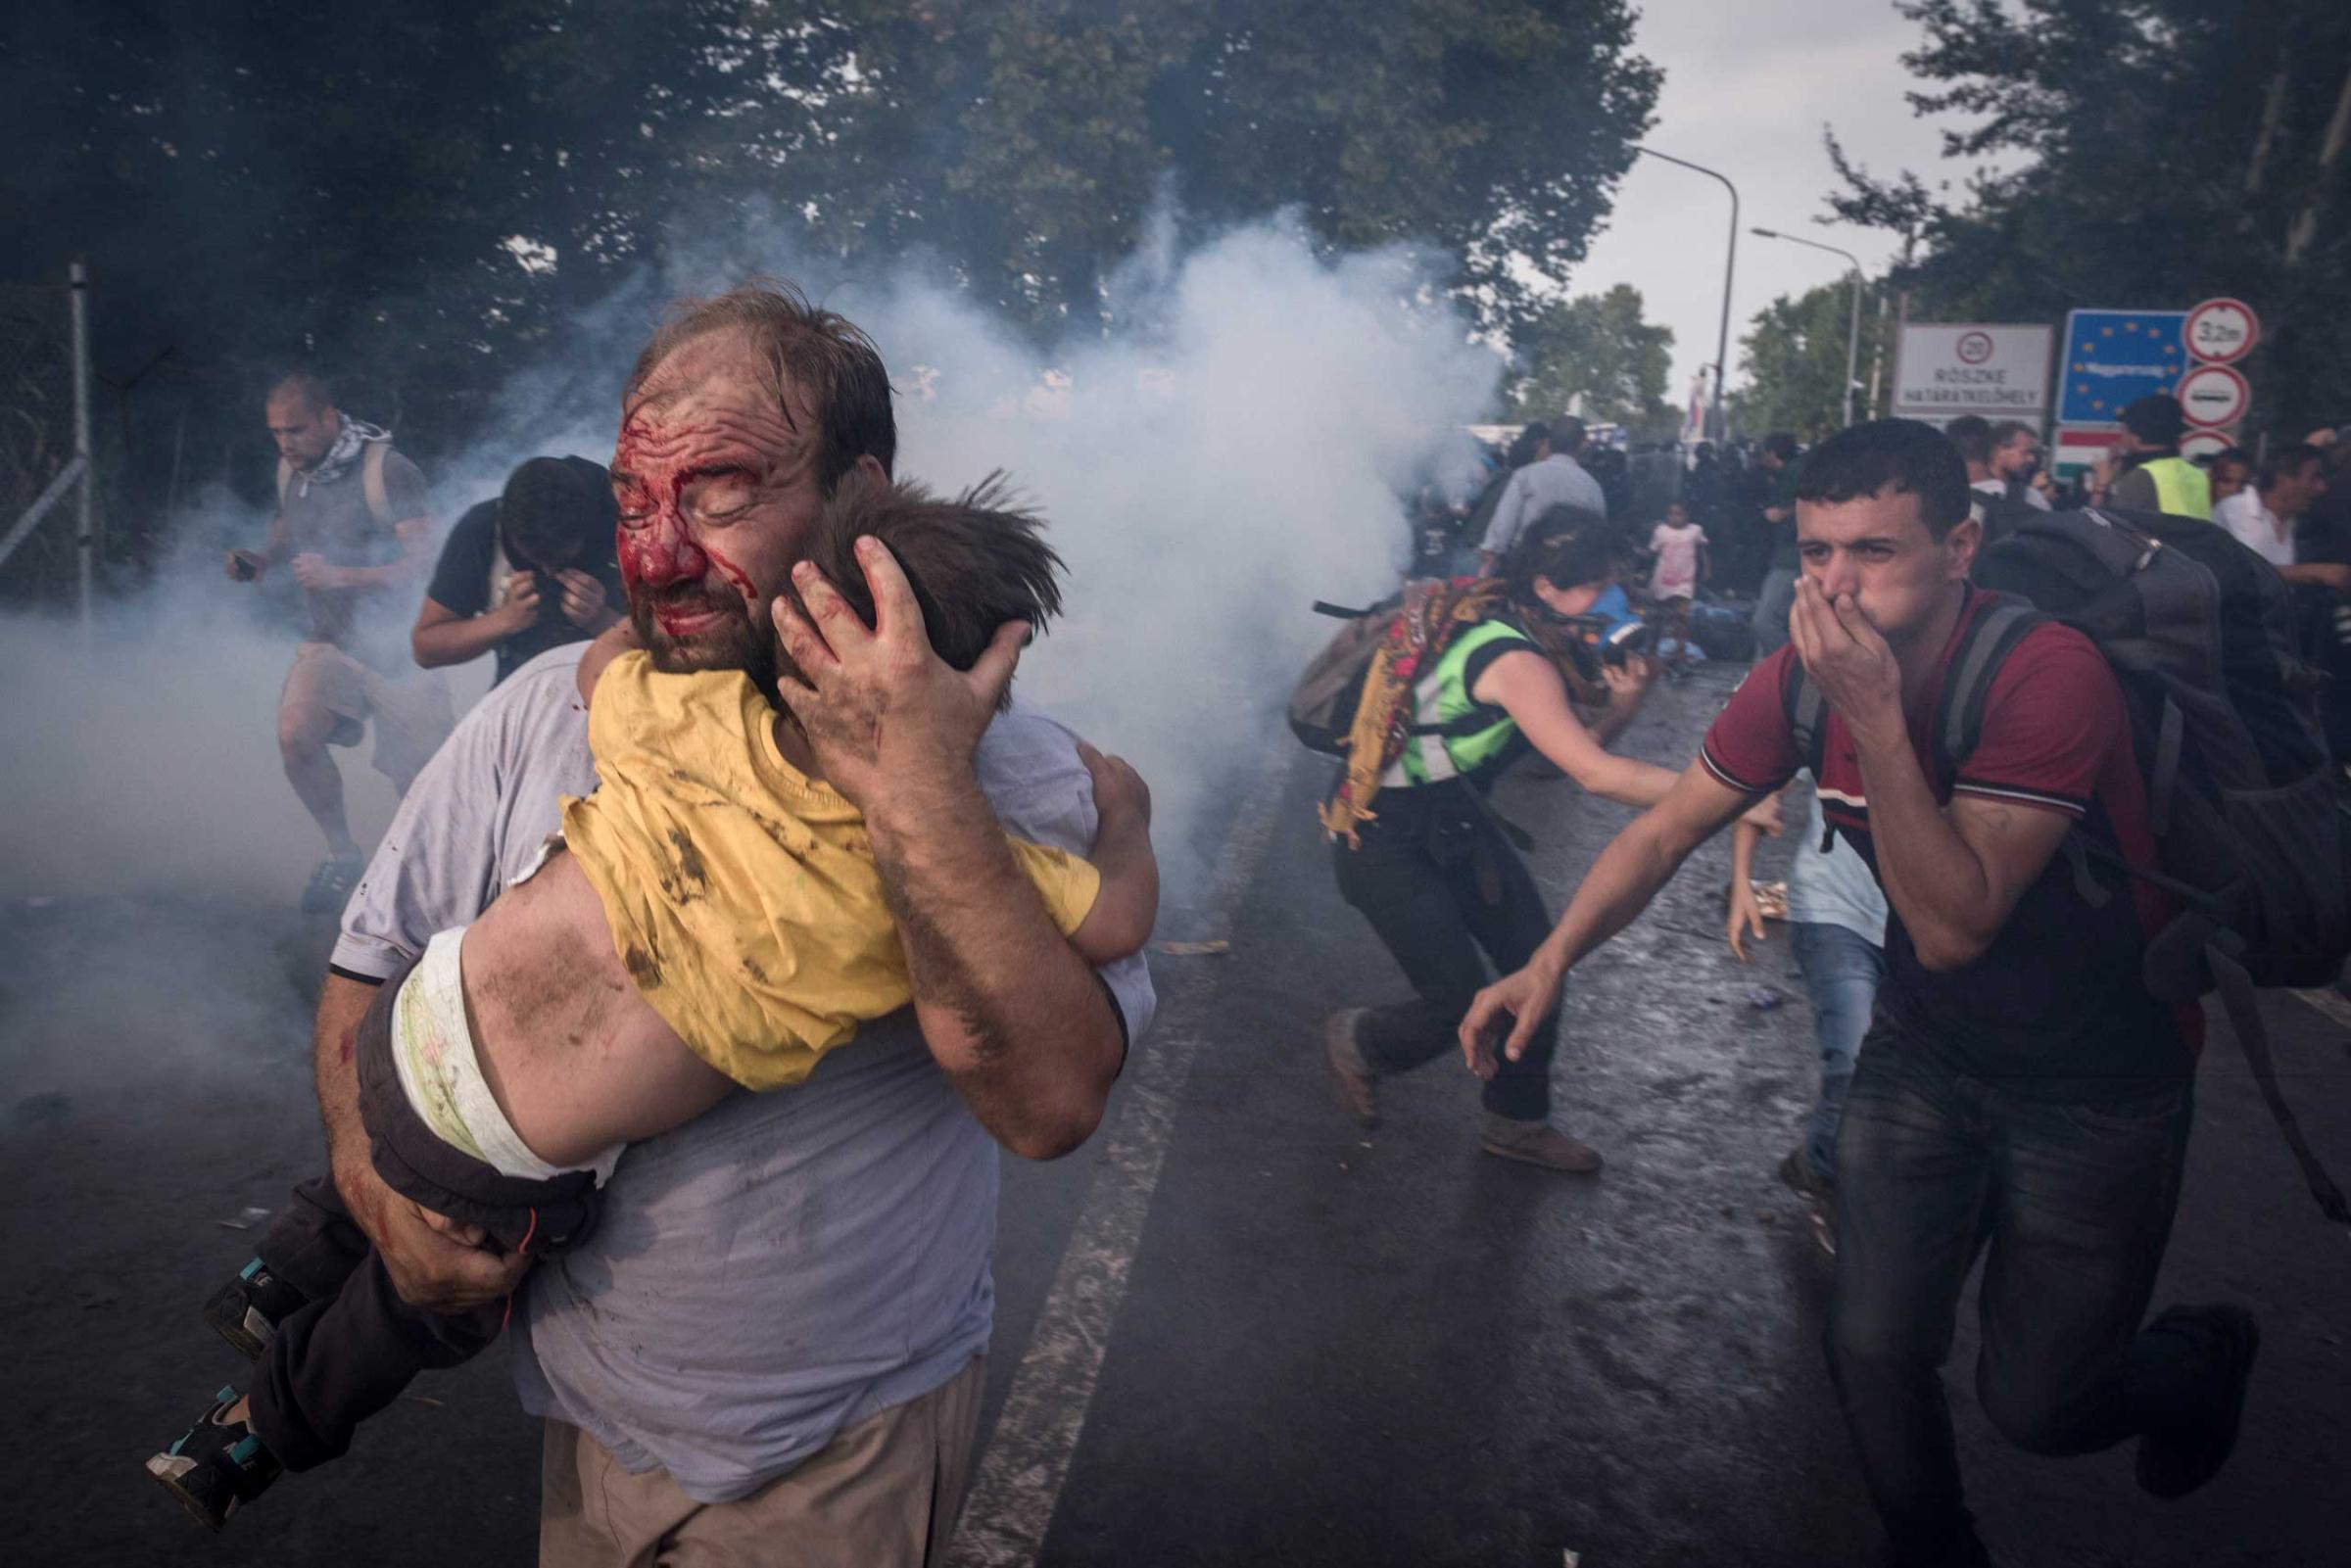 A migrant holds his child during a clash with Hungarian riot police at the Horgos border crossing in Serbia. Hungary's decision to seal its border rippled across Europe and other migrants scrambled to find alternative routes, in an effort, in most cases, to reach Germany. Sept. 16, 2015